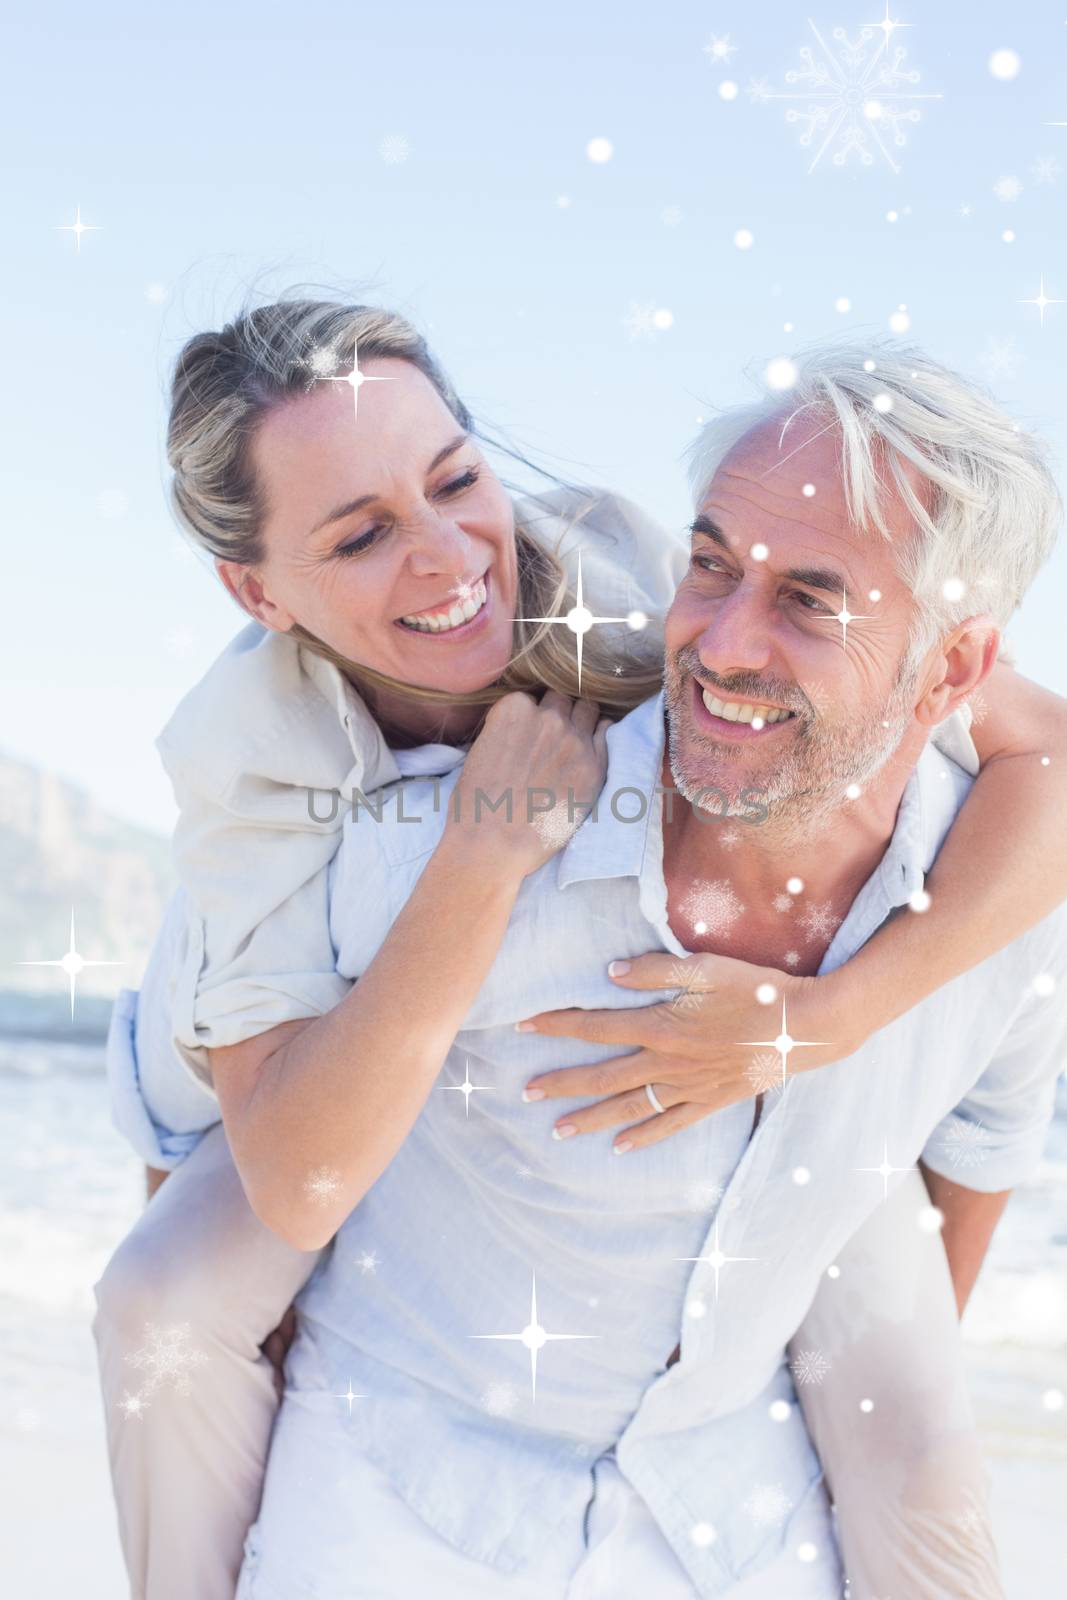 Man giving his smiling wife a piggy back at the beach against snow falling